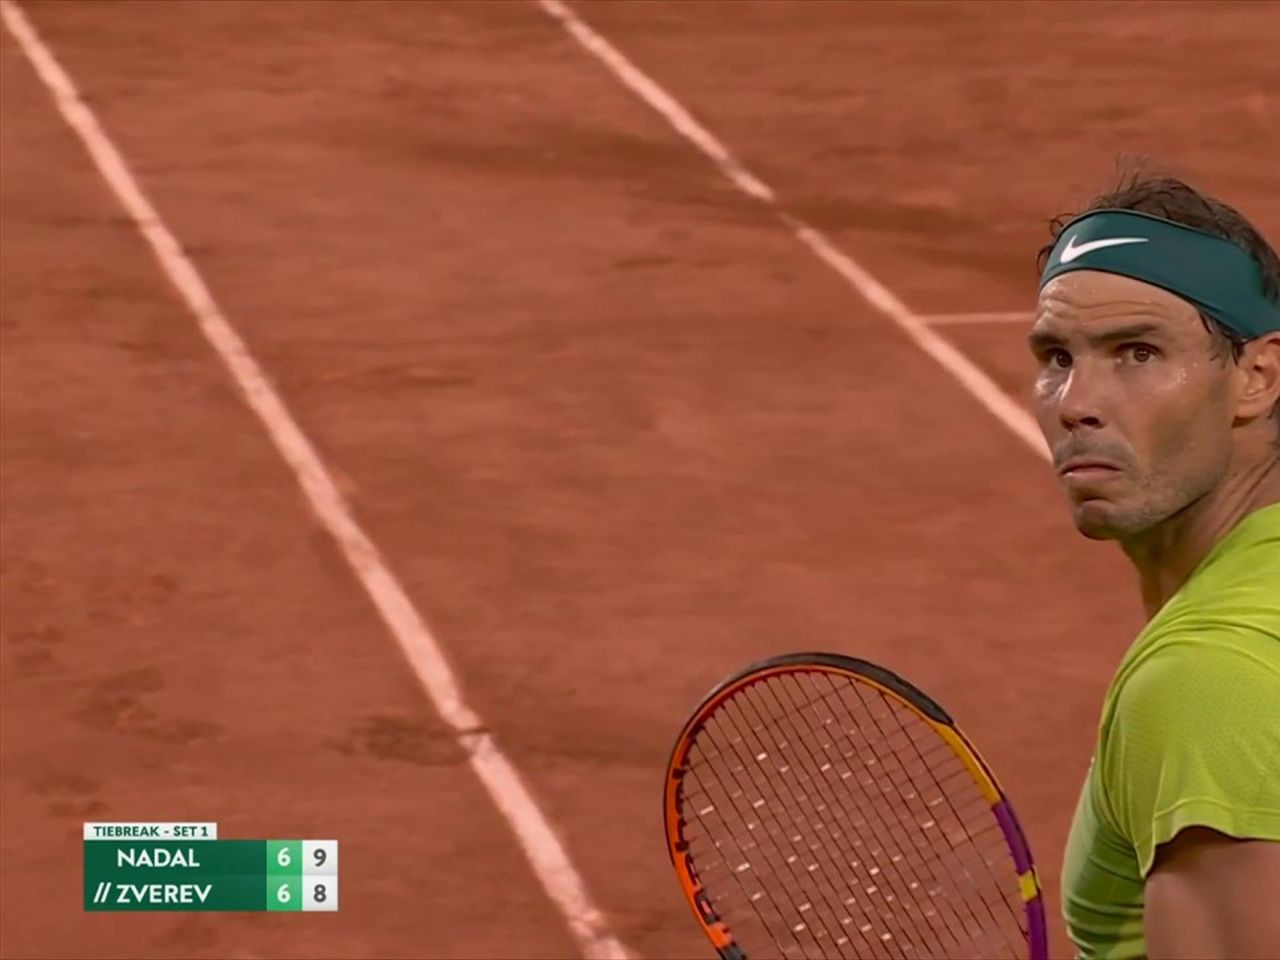 Nailed it! - Stunning winner seals first set for Rafael Nadal after Alexander Zverev early dominance at French Open - Tennis video